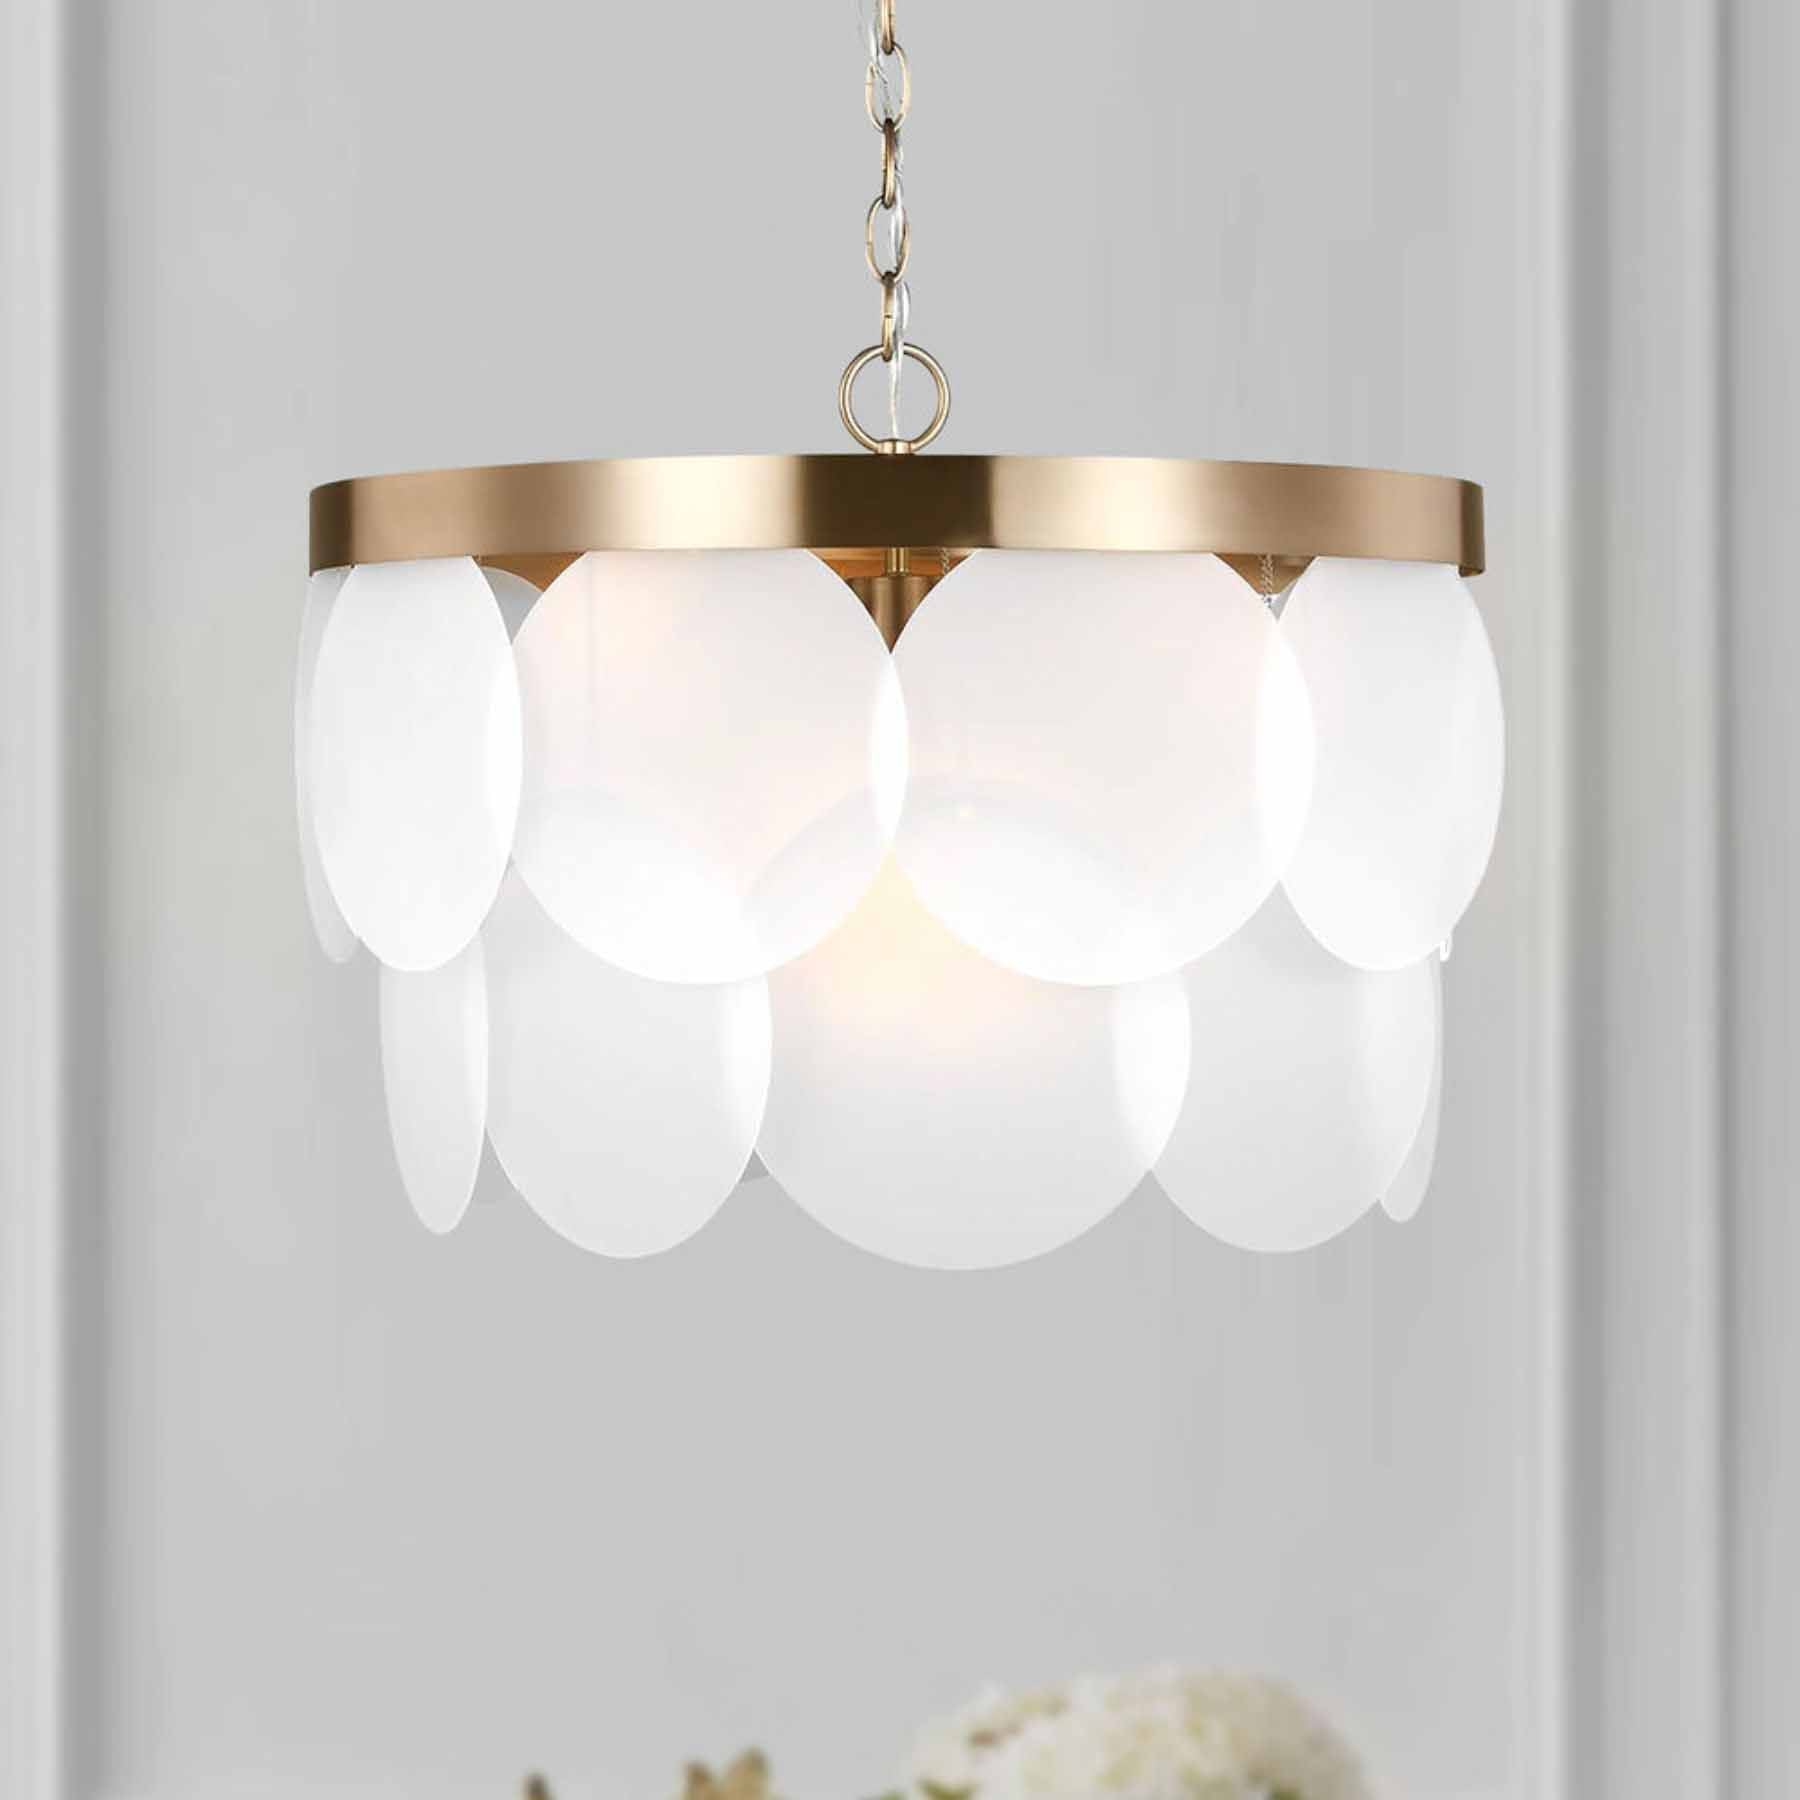 perfectly suited for bedrooms or living rooms the mellita pendant becomes the ideal focal point